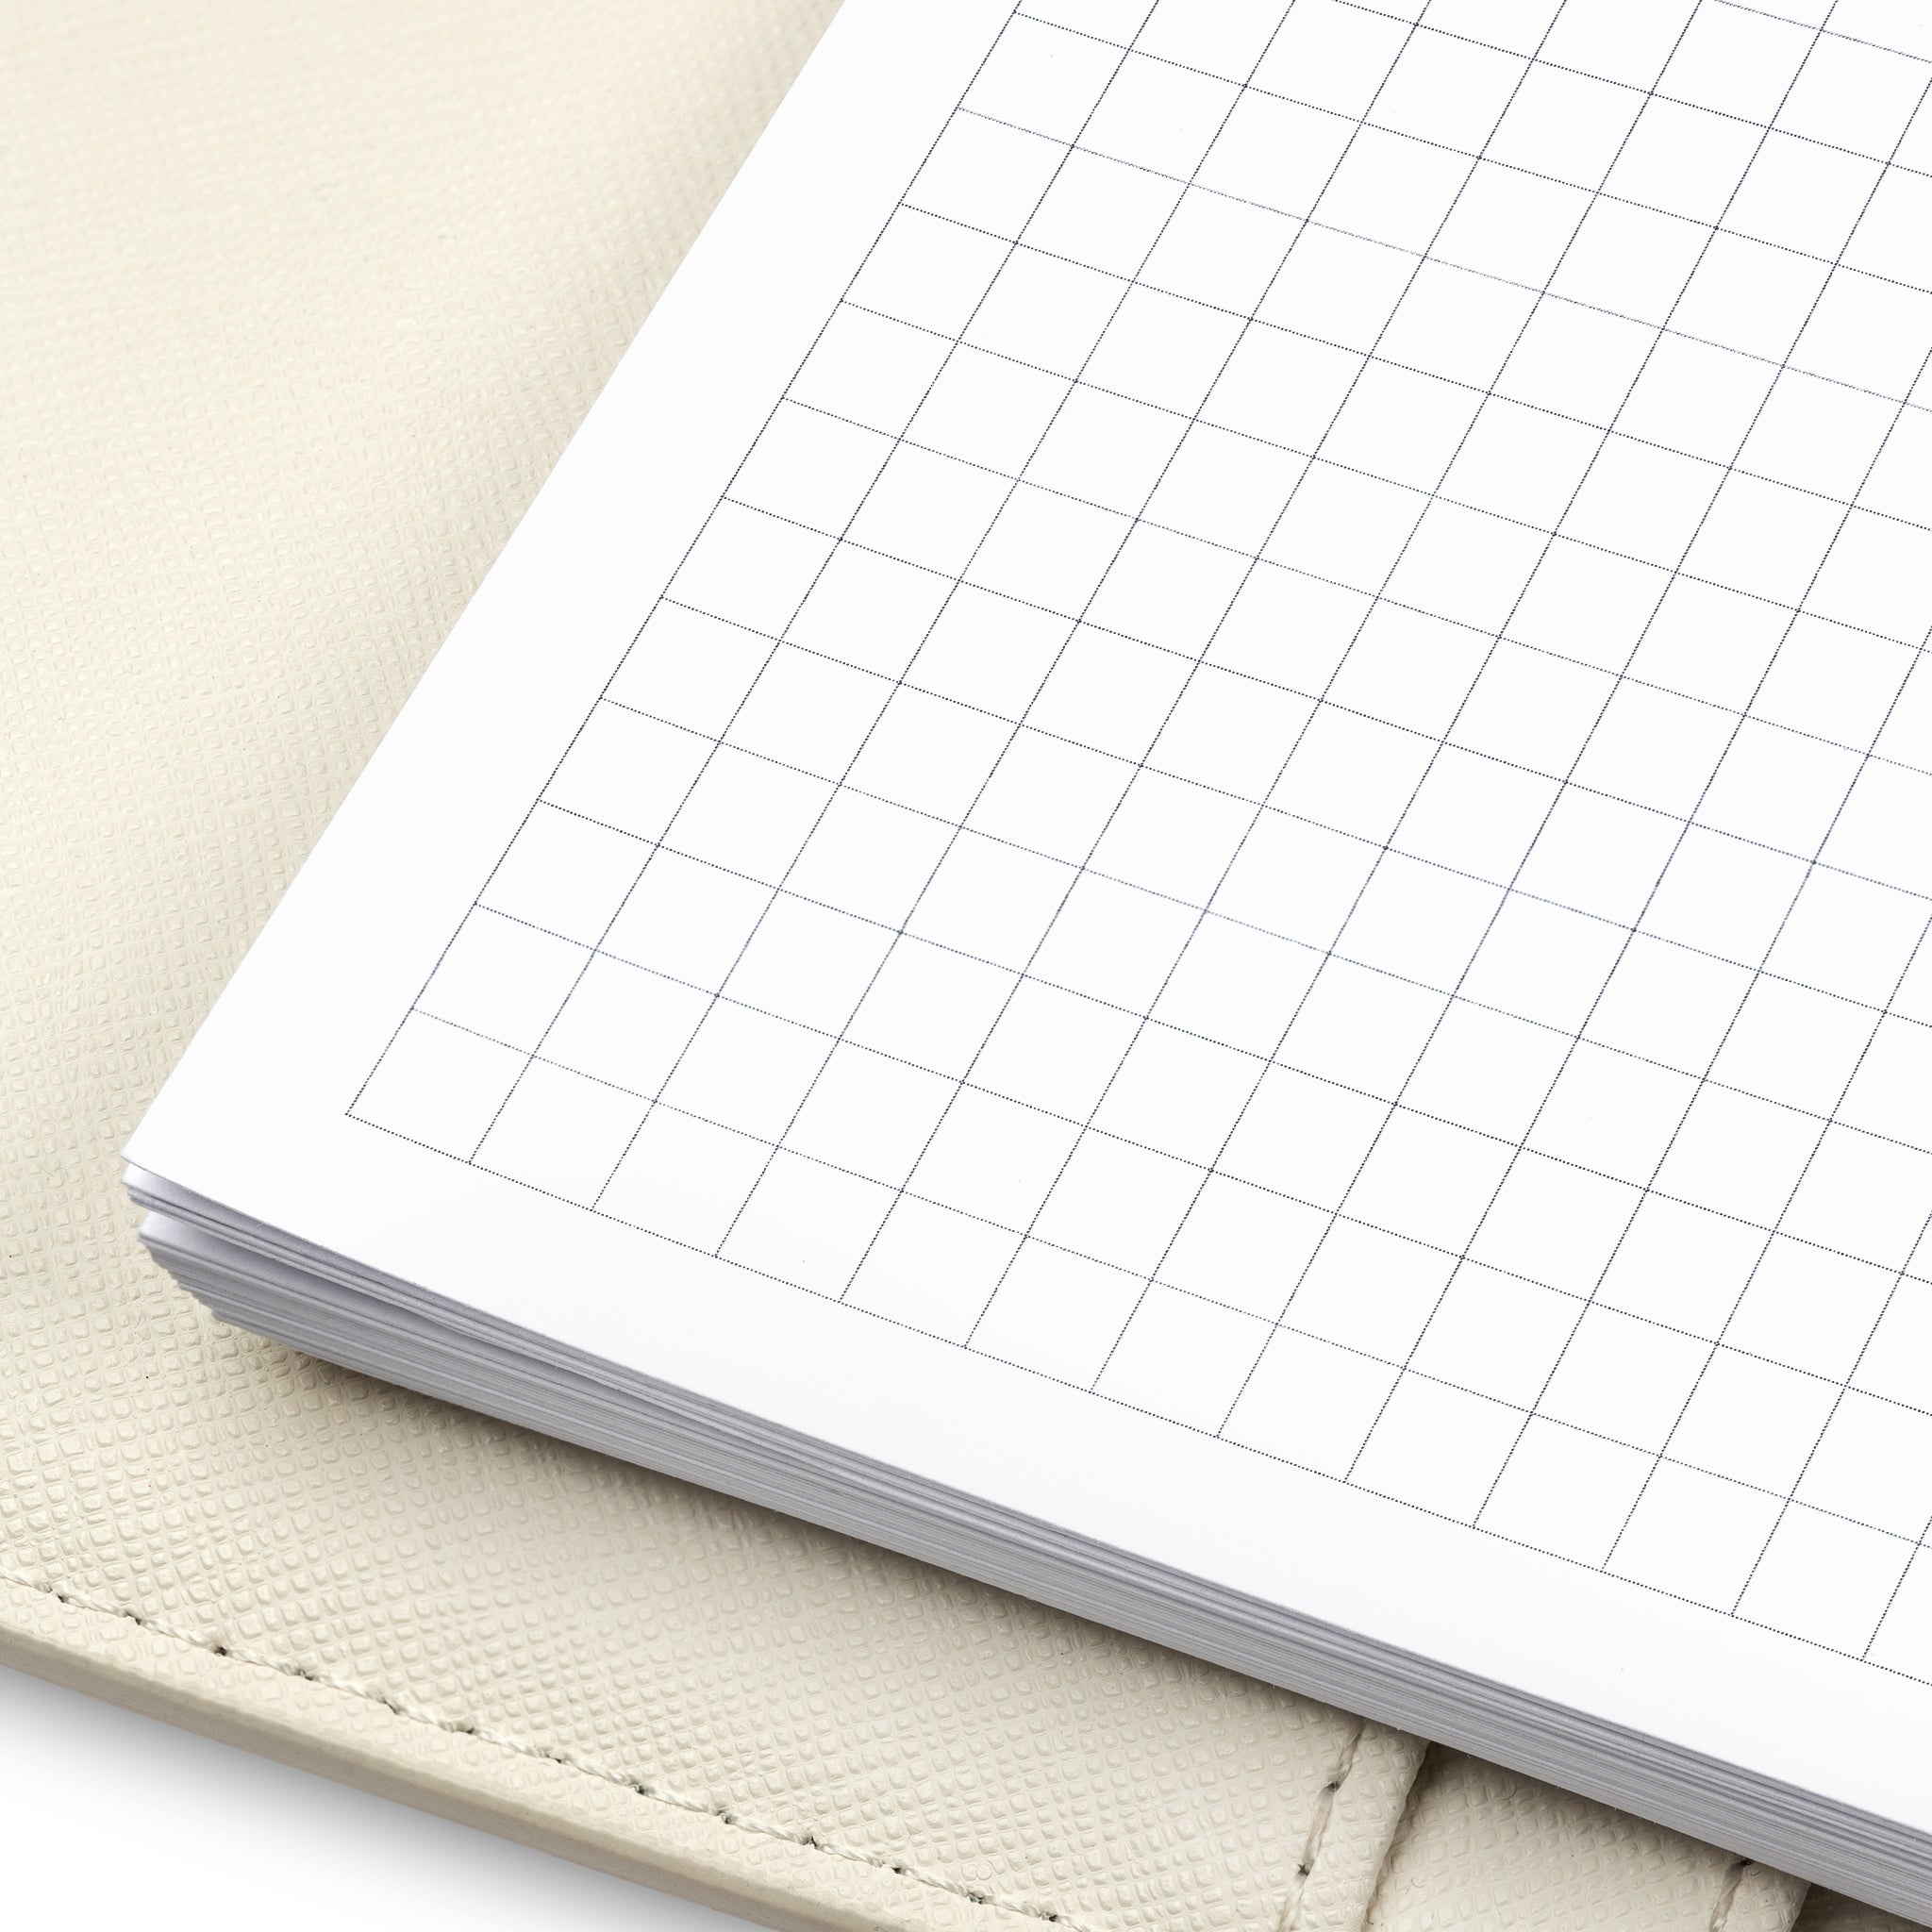 CLOTH & PAPER - LUXURY AESTHETIC PLANNERS, DIVIDERS, & INSERTS